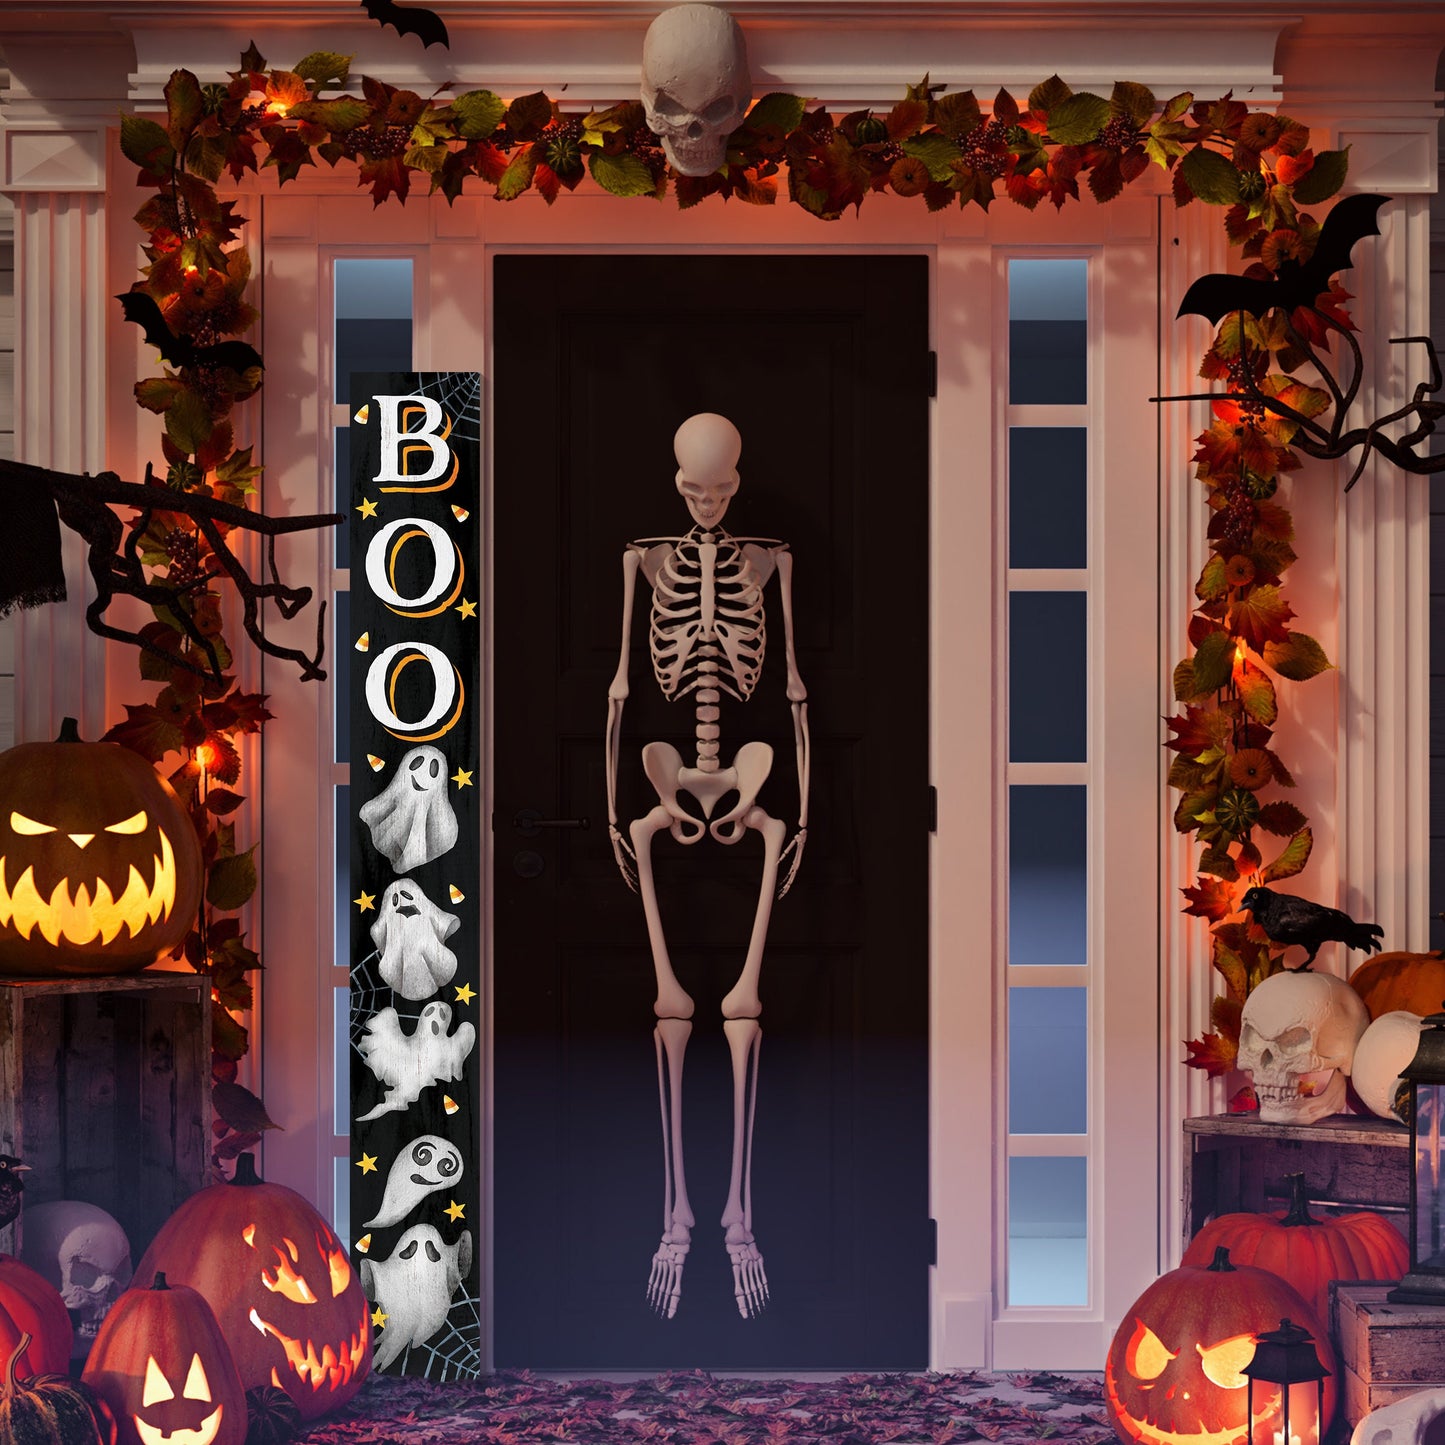 72in Wooden "BOO" Halloween Porch Sign with Ghost Pattern - Spooky Front Door Decor for Haunting Halloween Celebrations